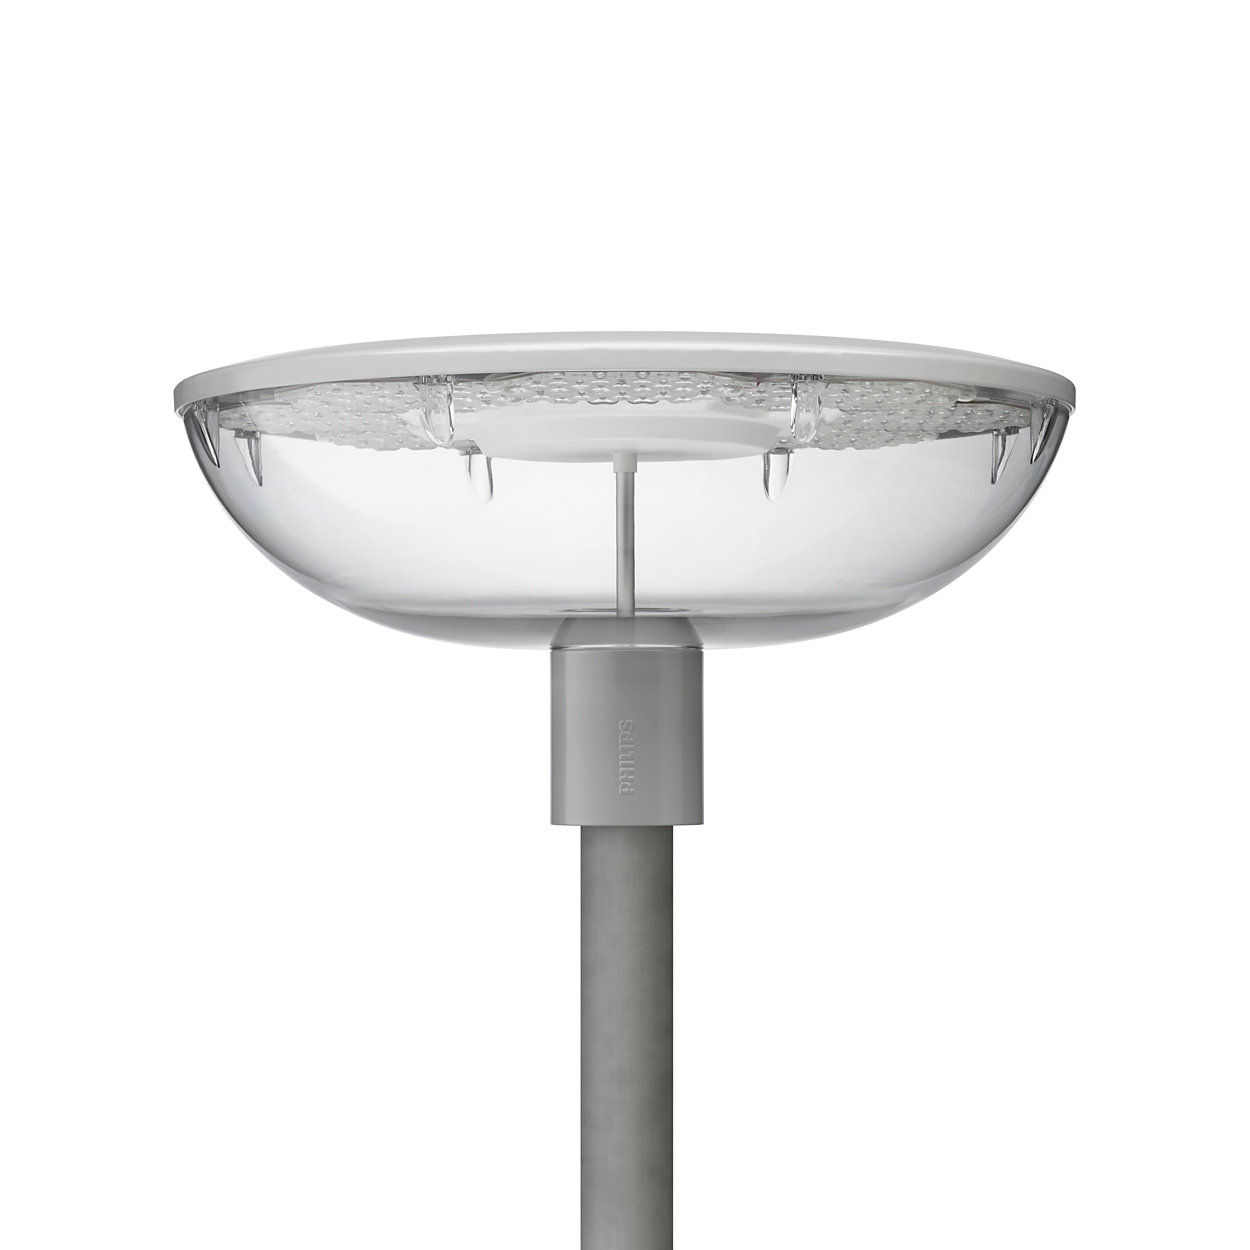 Philips TownGuide Performer – flexible, modern designs for every application need